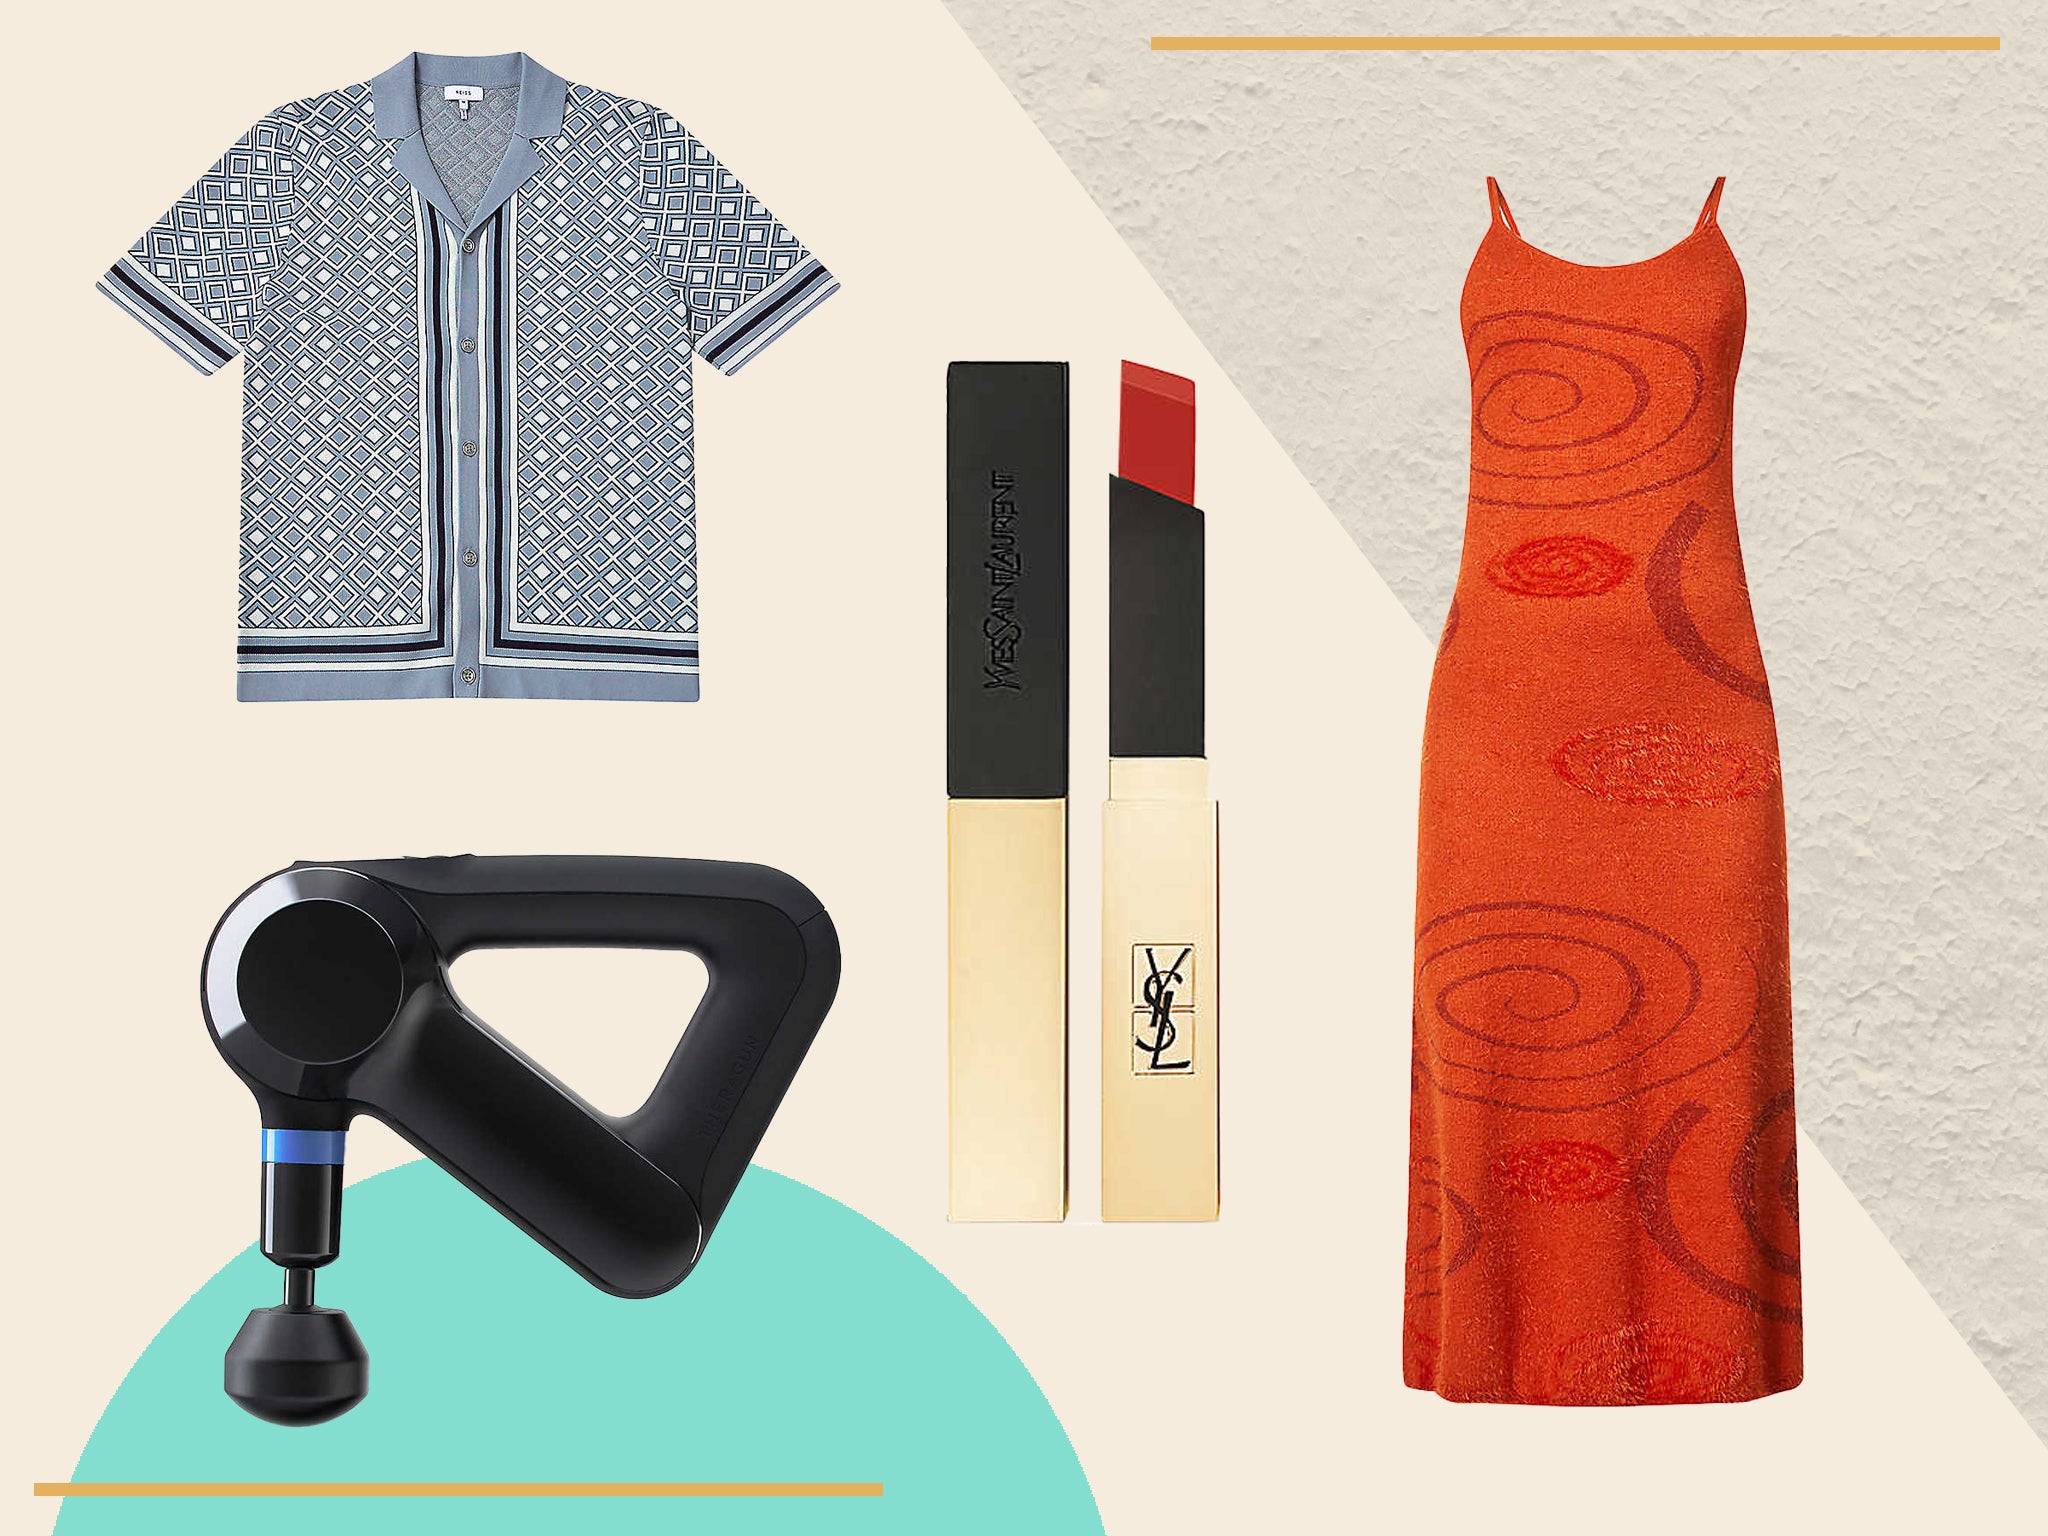 Designer deals for the whole family are now available at the famous department store